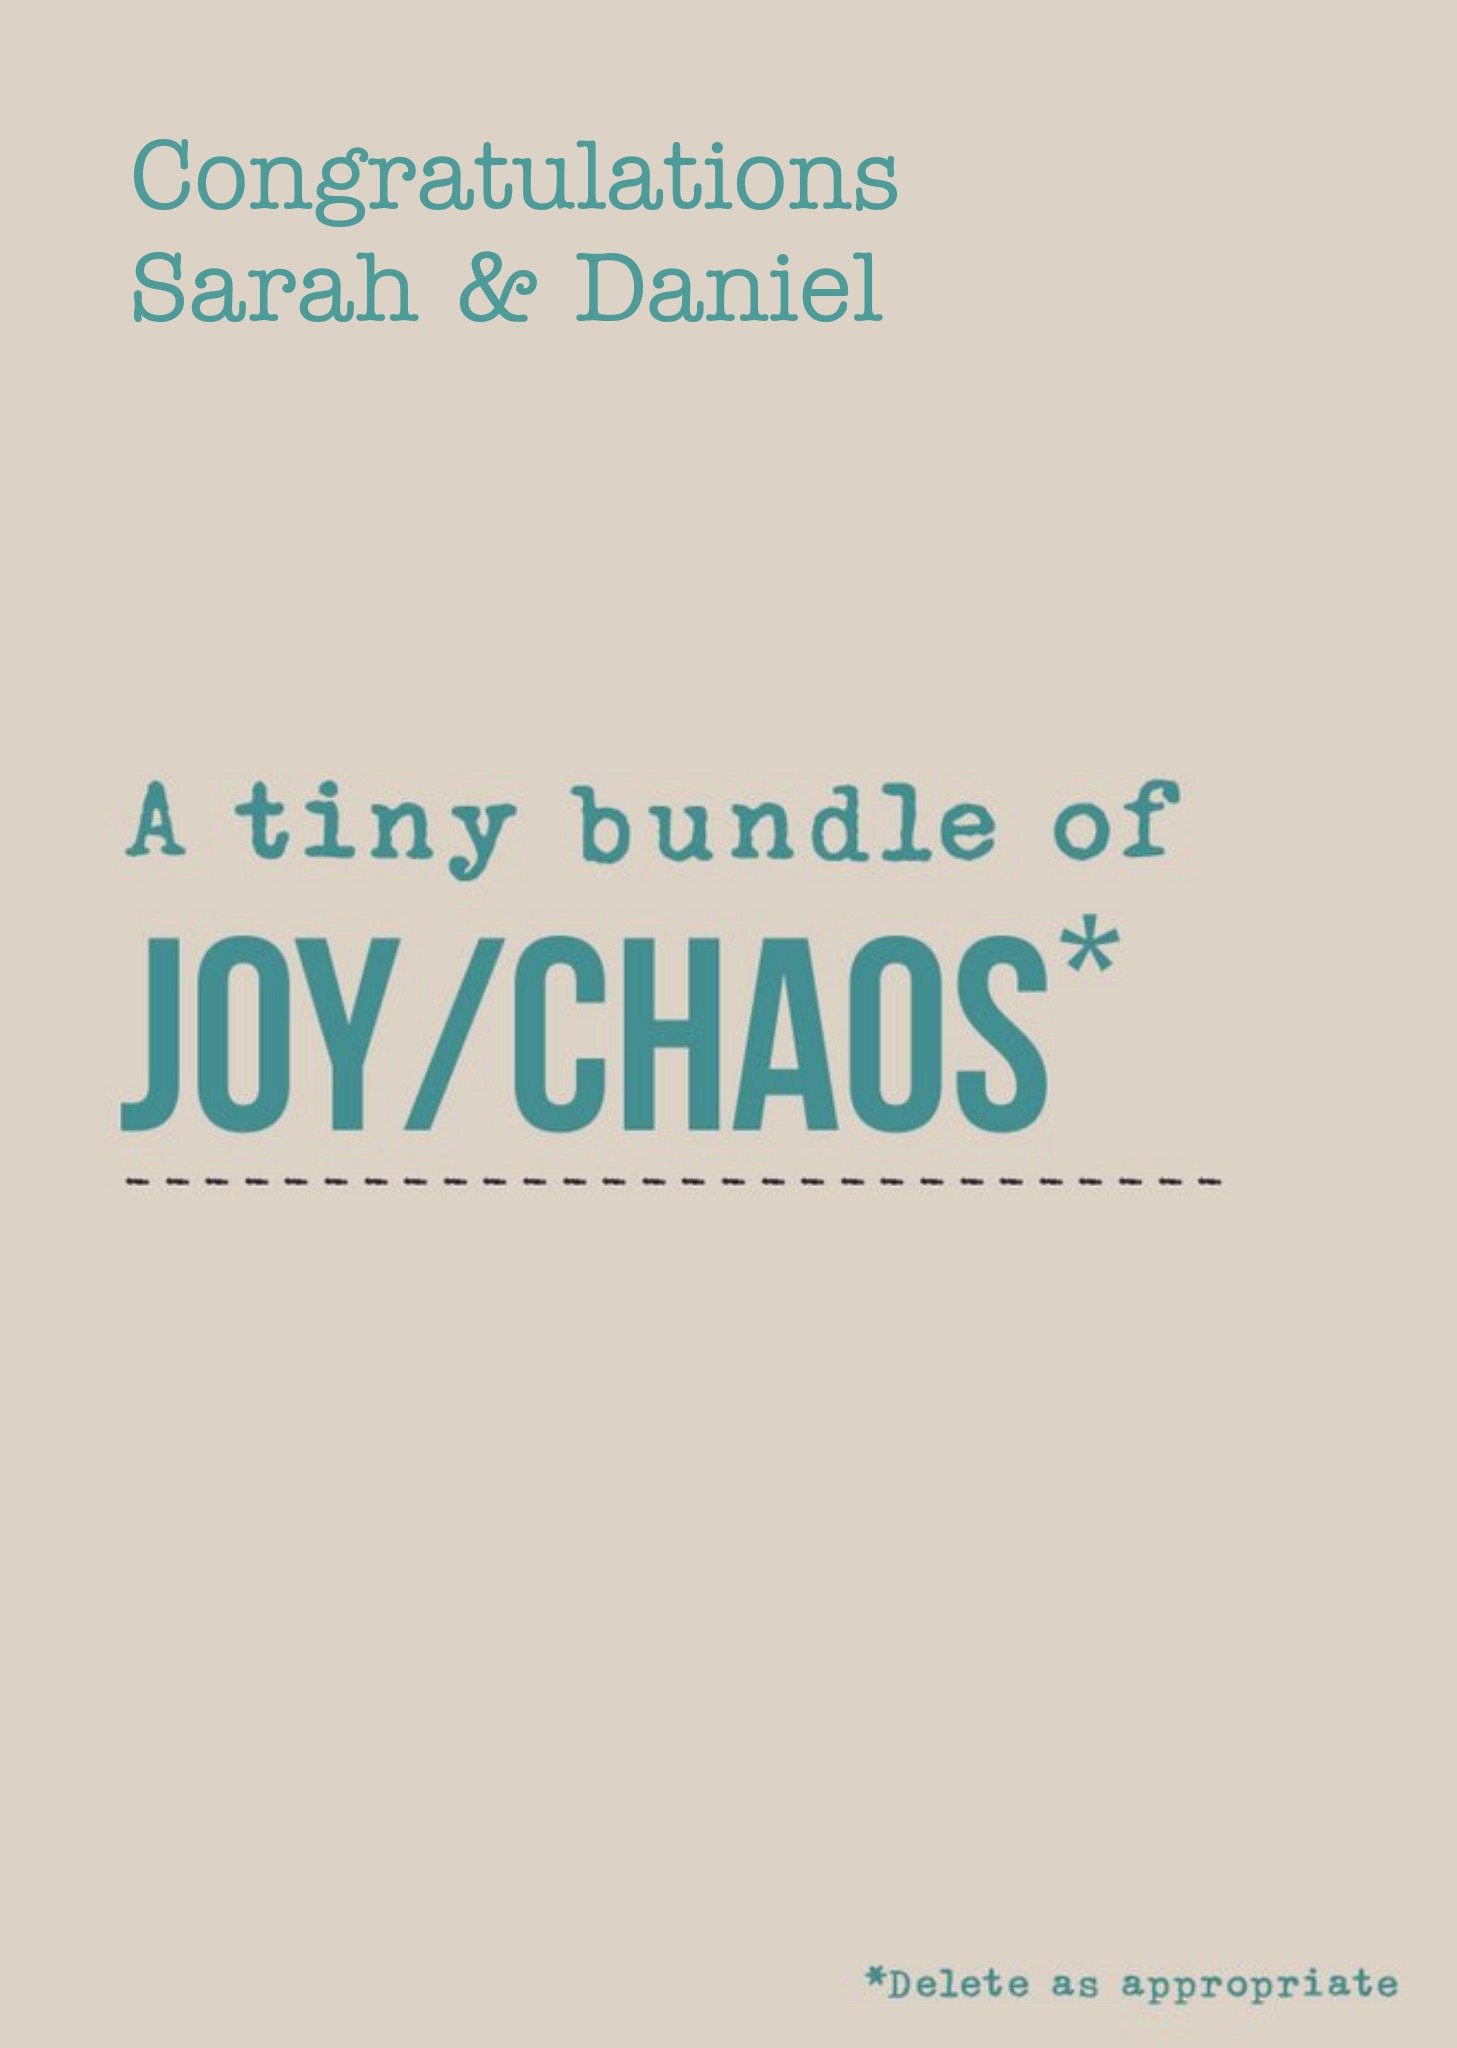 Moonpig Congrats On A Tiny Bundle Of Joy And Chaos New Baby Card, Large